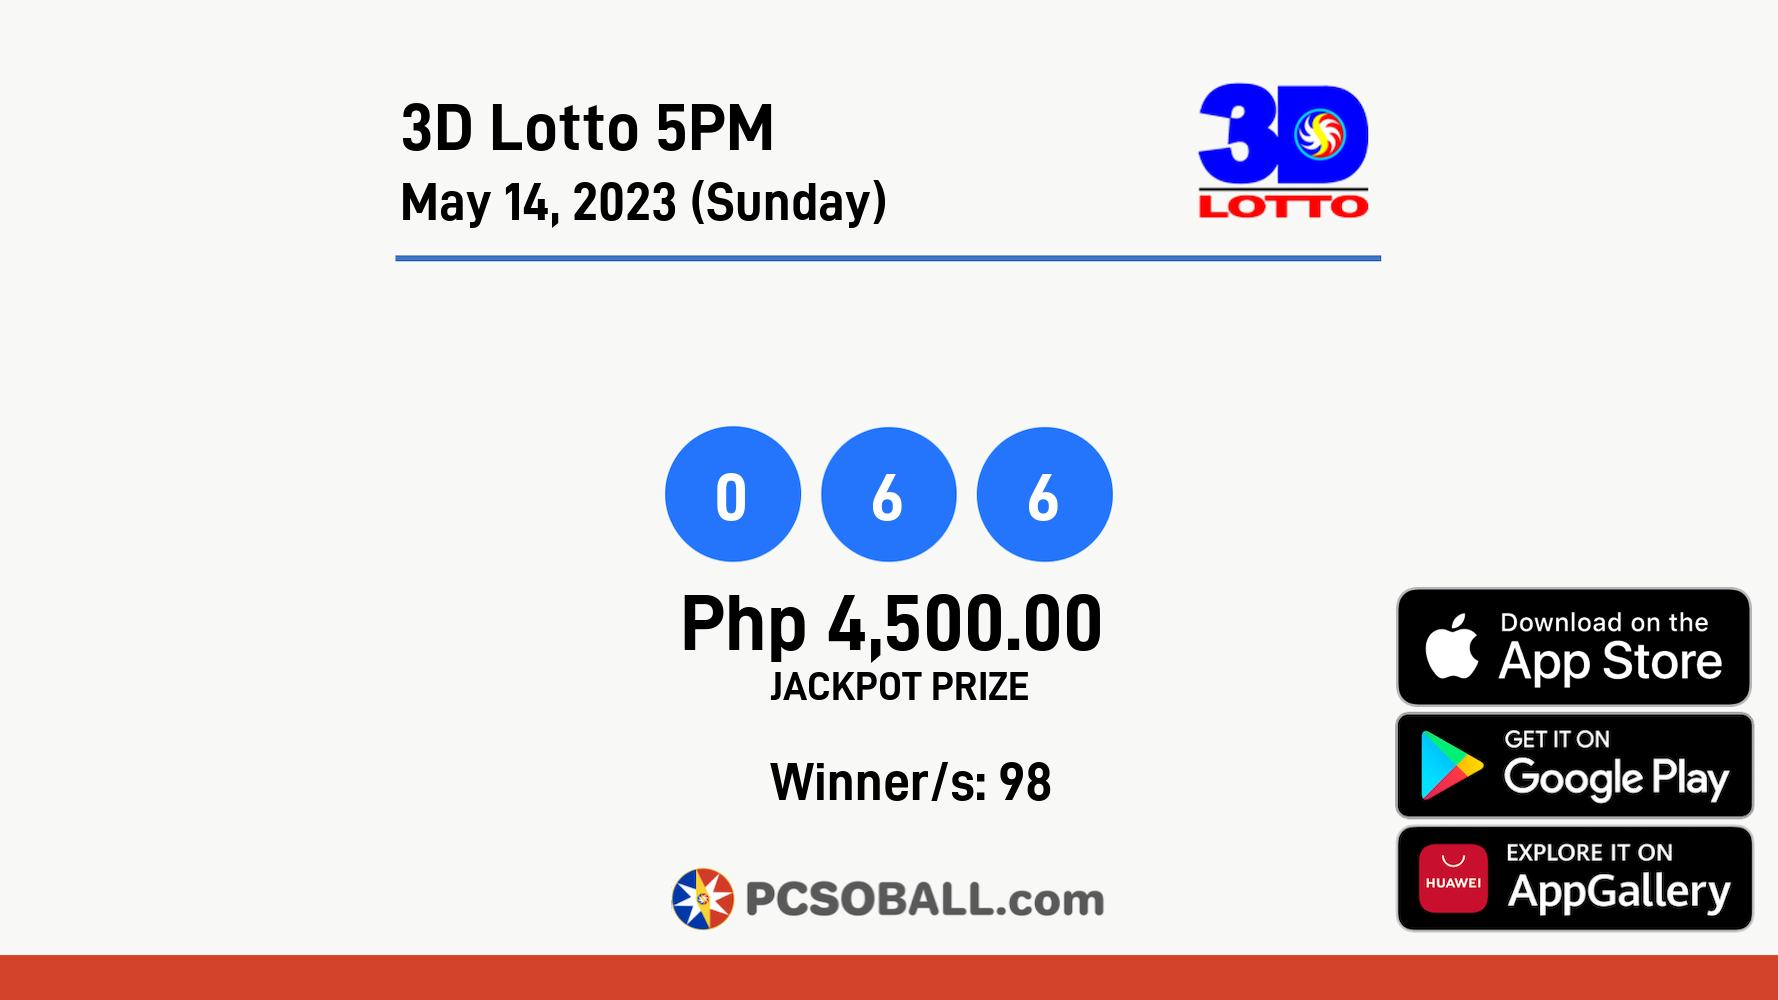 3D Lotto 5PM May 14, 2023 (Sunday) Result